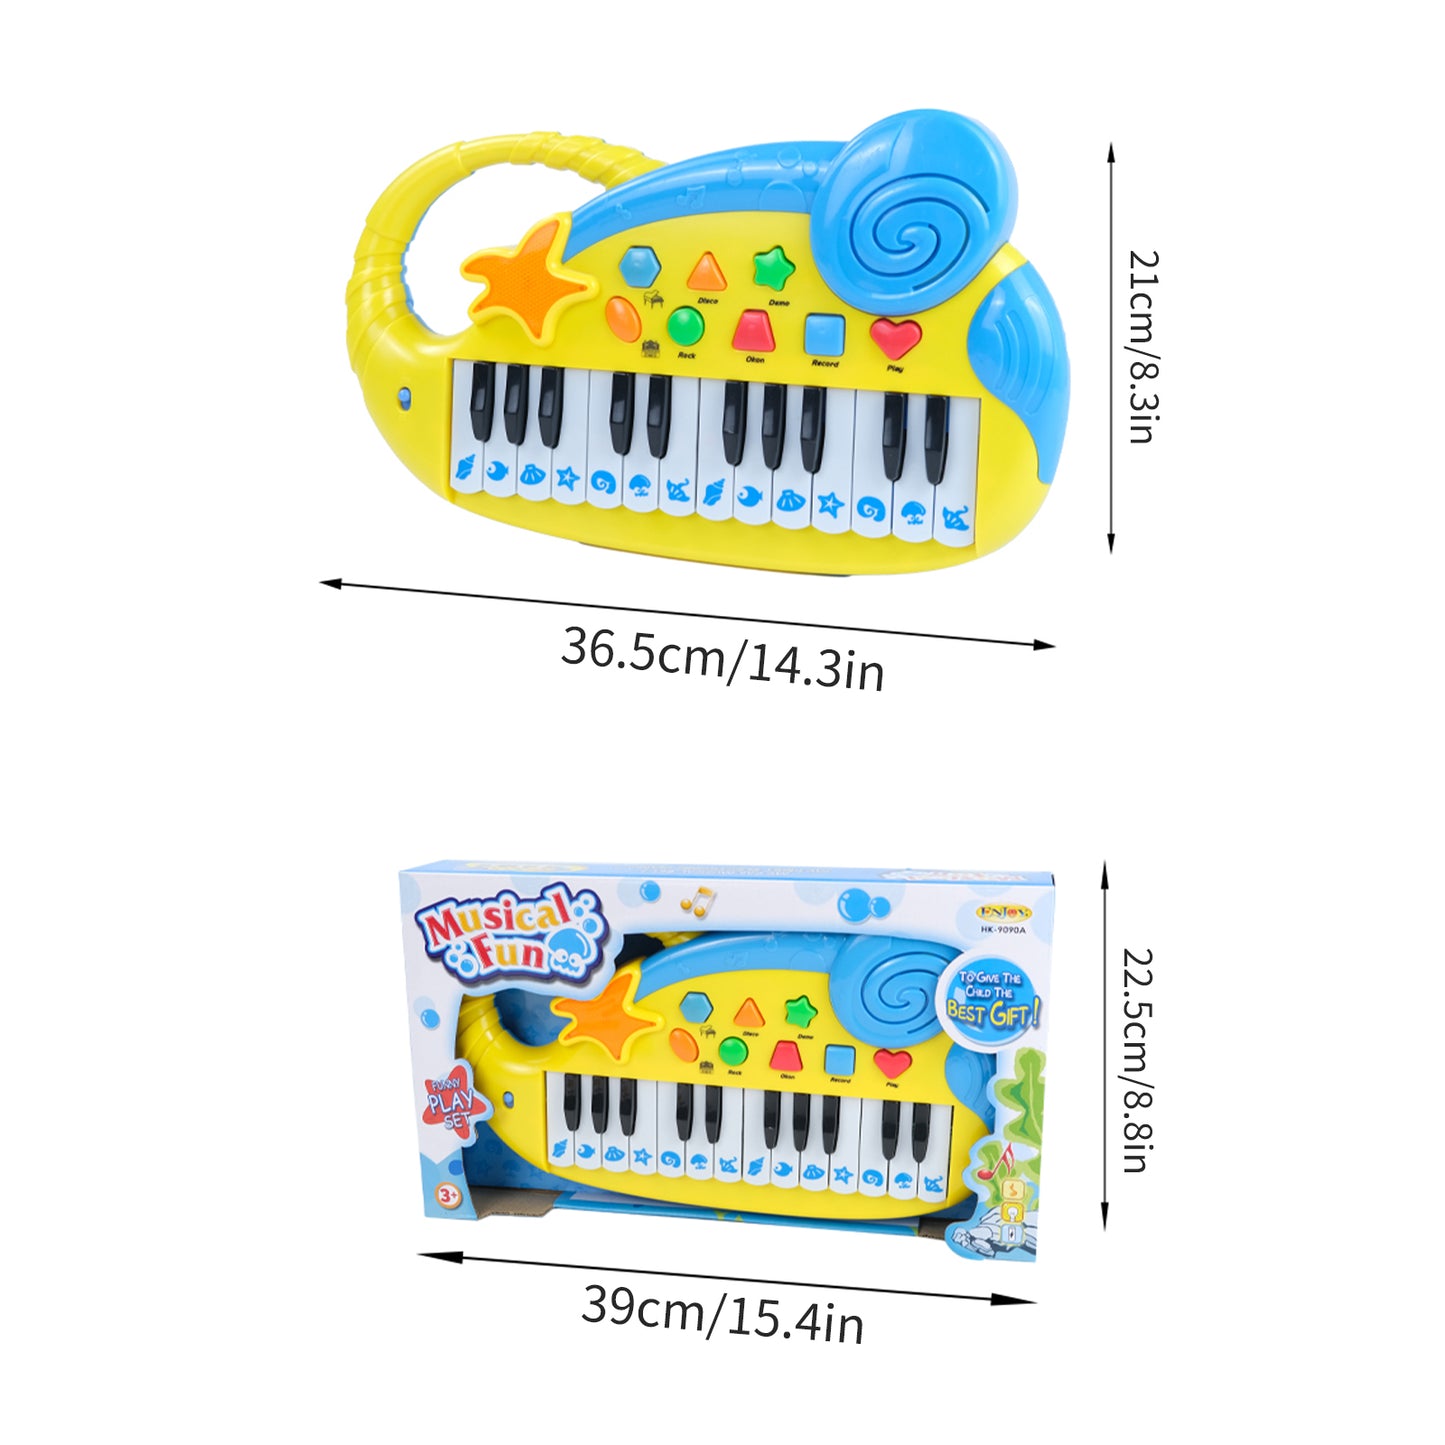 AOQIMITENJOY Conch Musical Instrument Electronic 24 Keys Keyboard Toys LED Lighting Children's Toys Birthday Gifts for Boys and Girls 3 Year Old+ HK-9090A